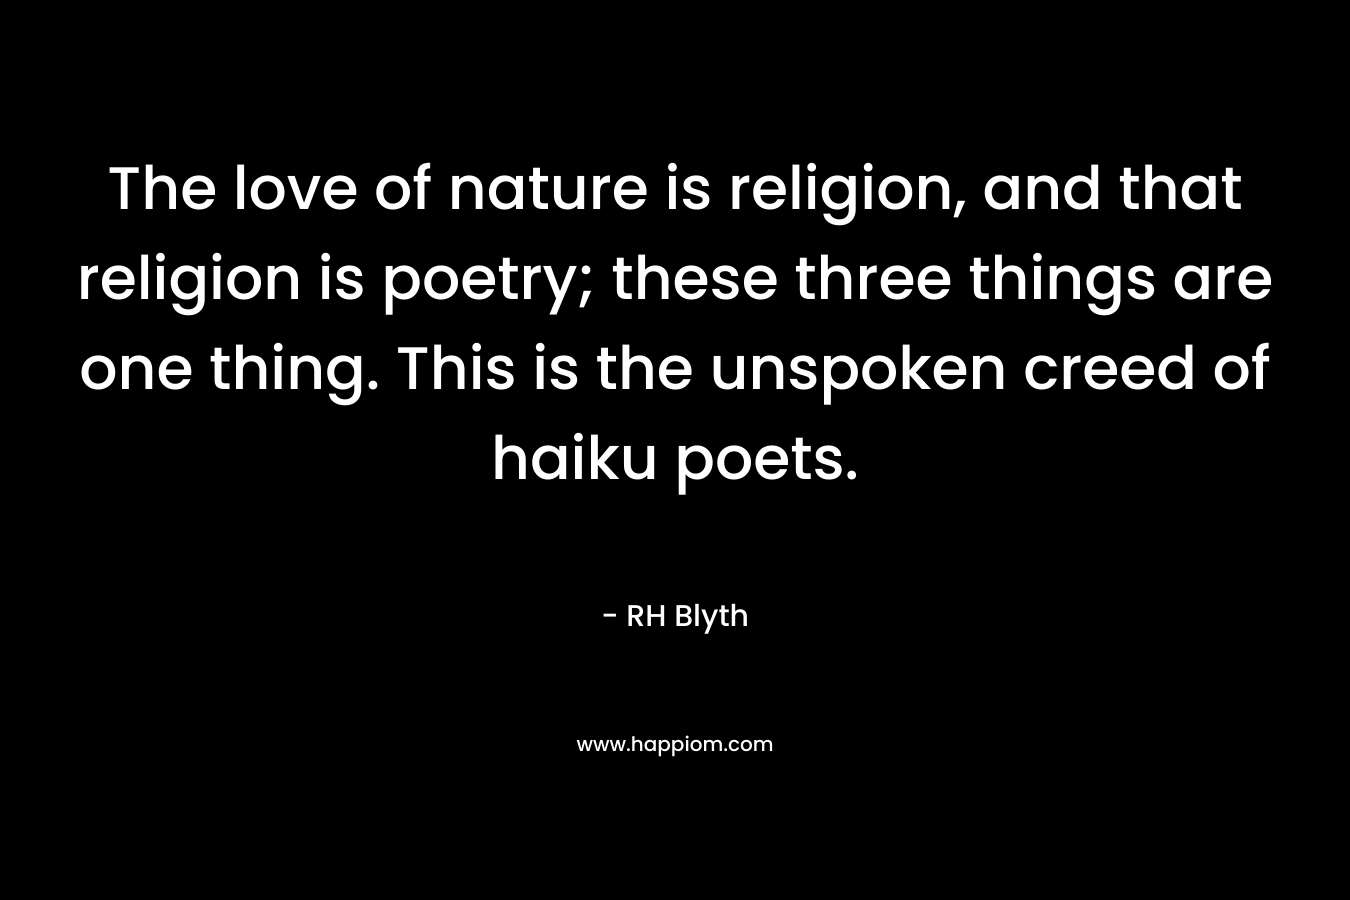 The love of nature is religion, and that religion is poetry; these three things are one thing. This is the unspoken creed of haiku poets. – RH Blyth